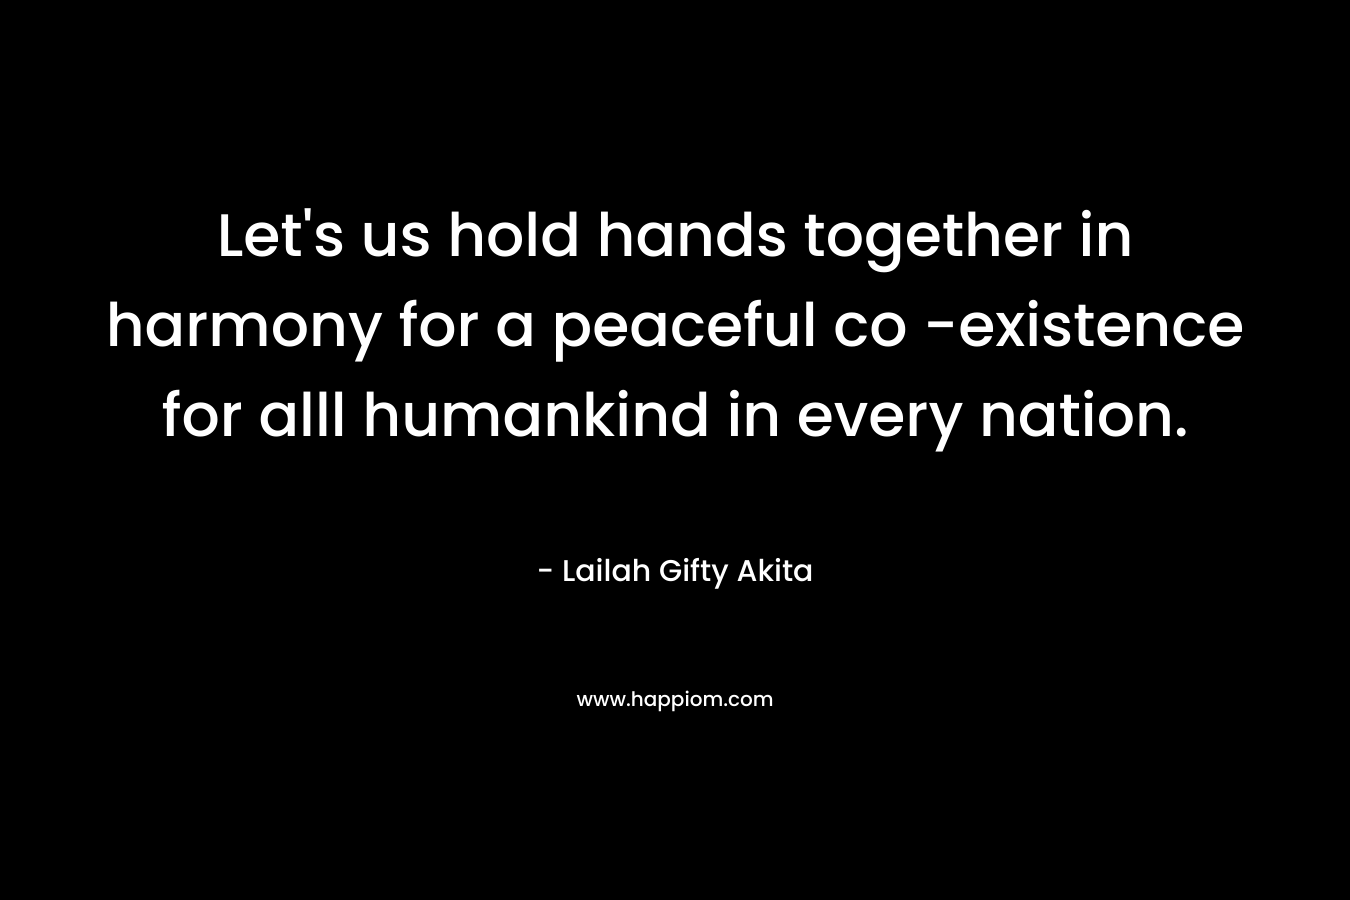 Let’s us hold hands together in harmony for a peaceful co -existence for alll humankind in every nation. – Lailah Gifty Akita